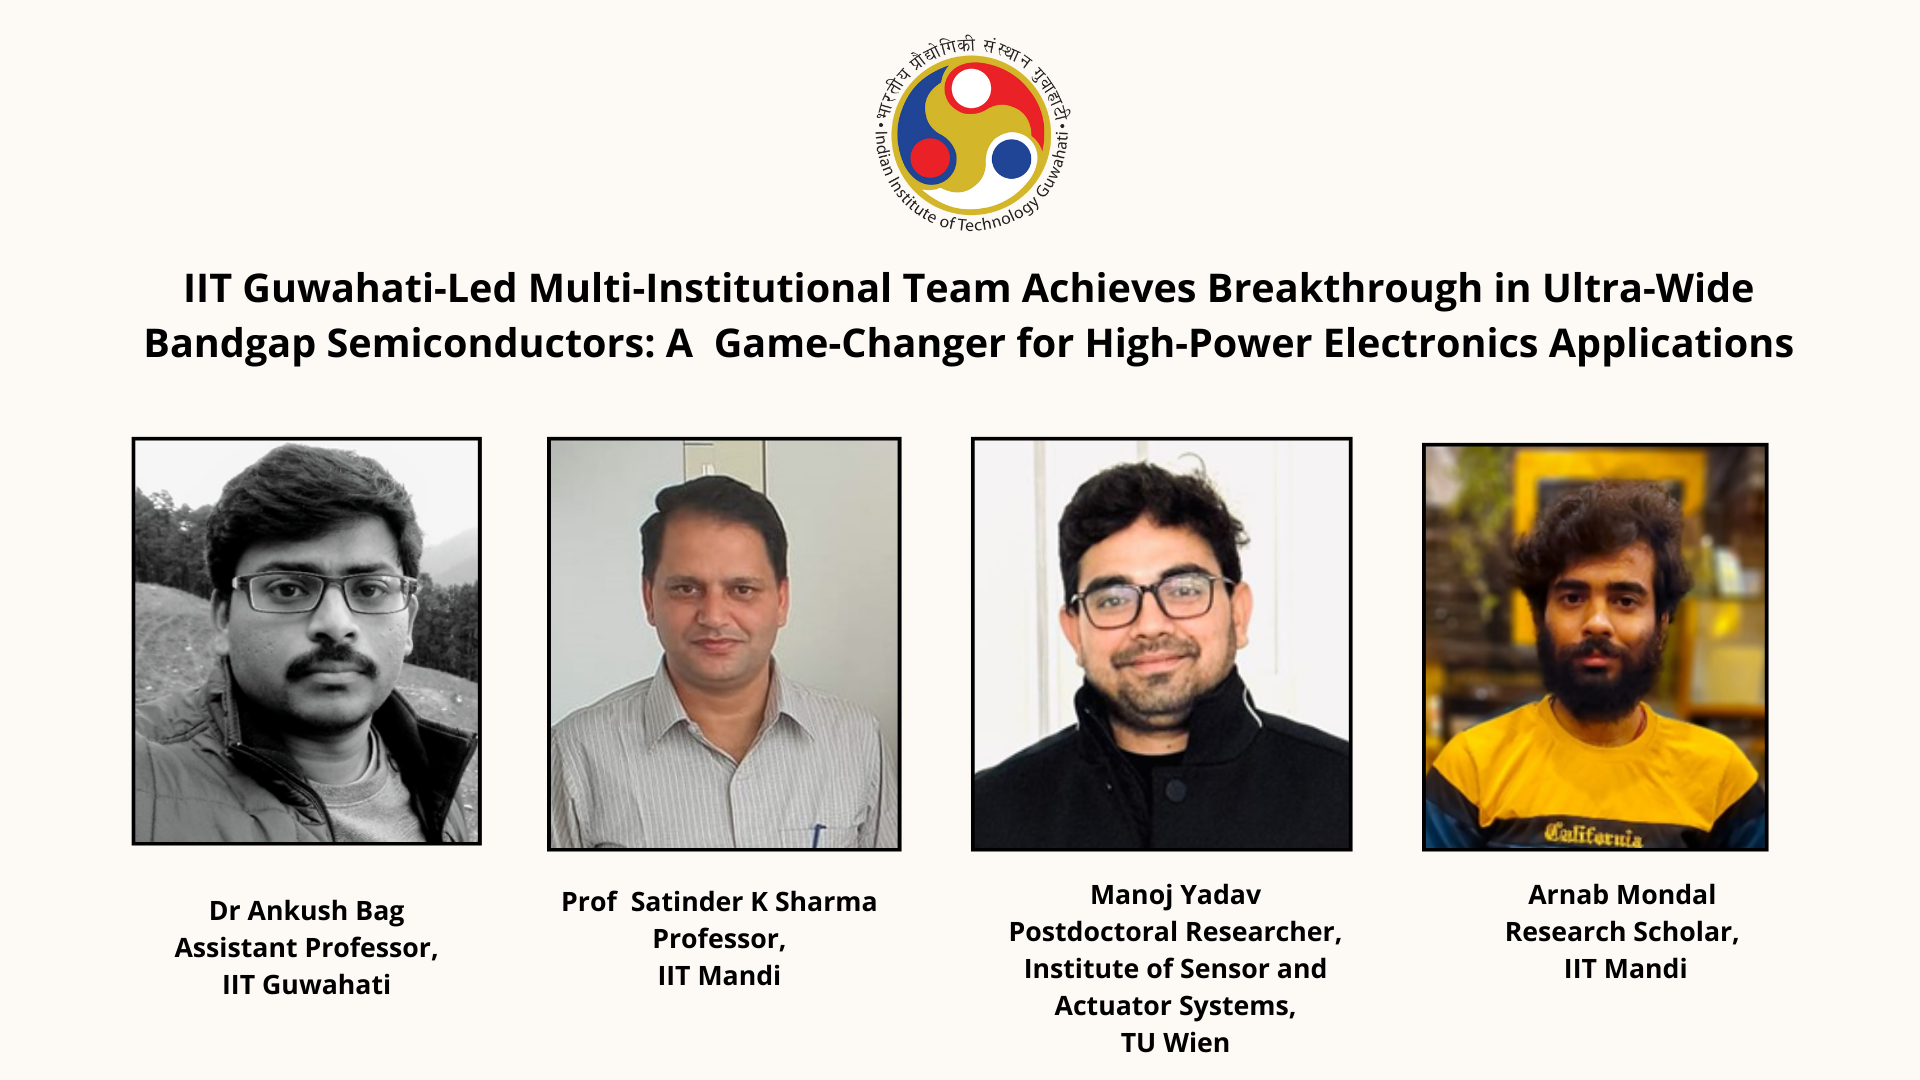 IIT Guwahati-Led Multi-Institutional Team Achieves Breakthrough in Ultra-Wide Bandgap Semiconductors: A Game-Changer for High-Power Electronics Applications